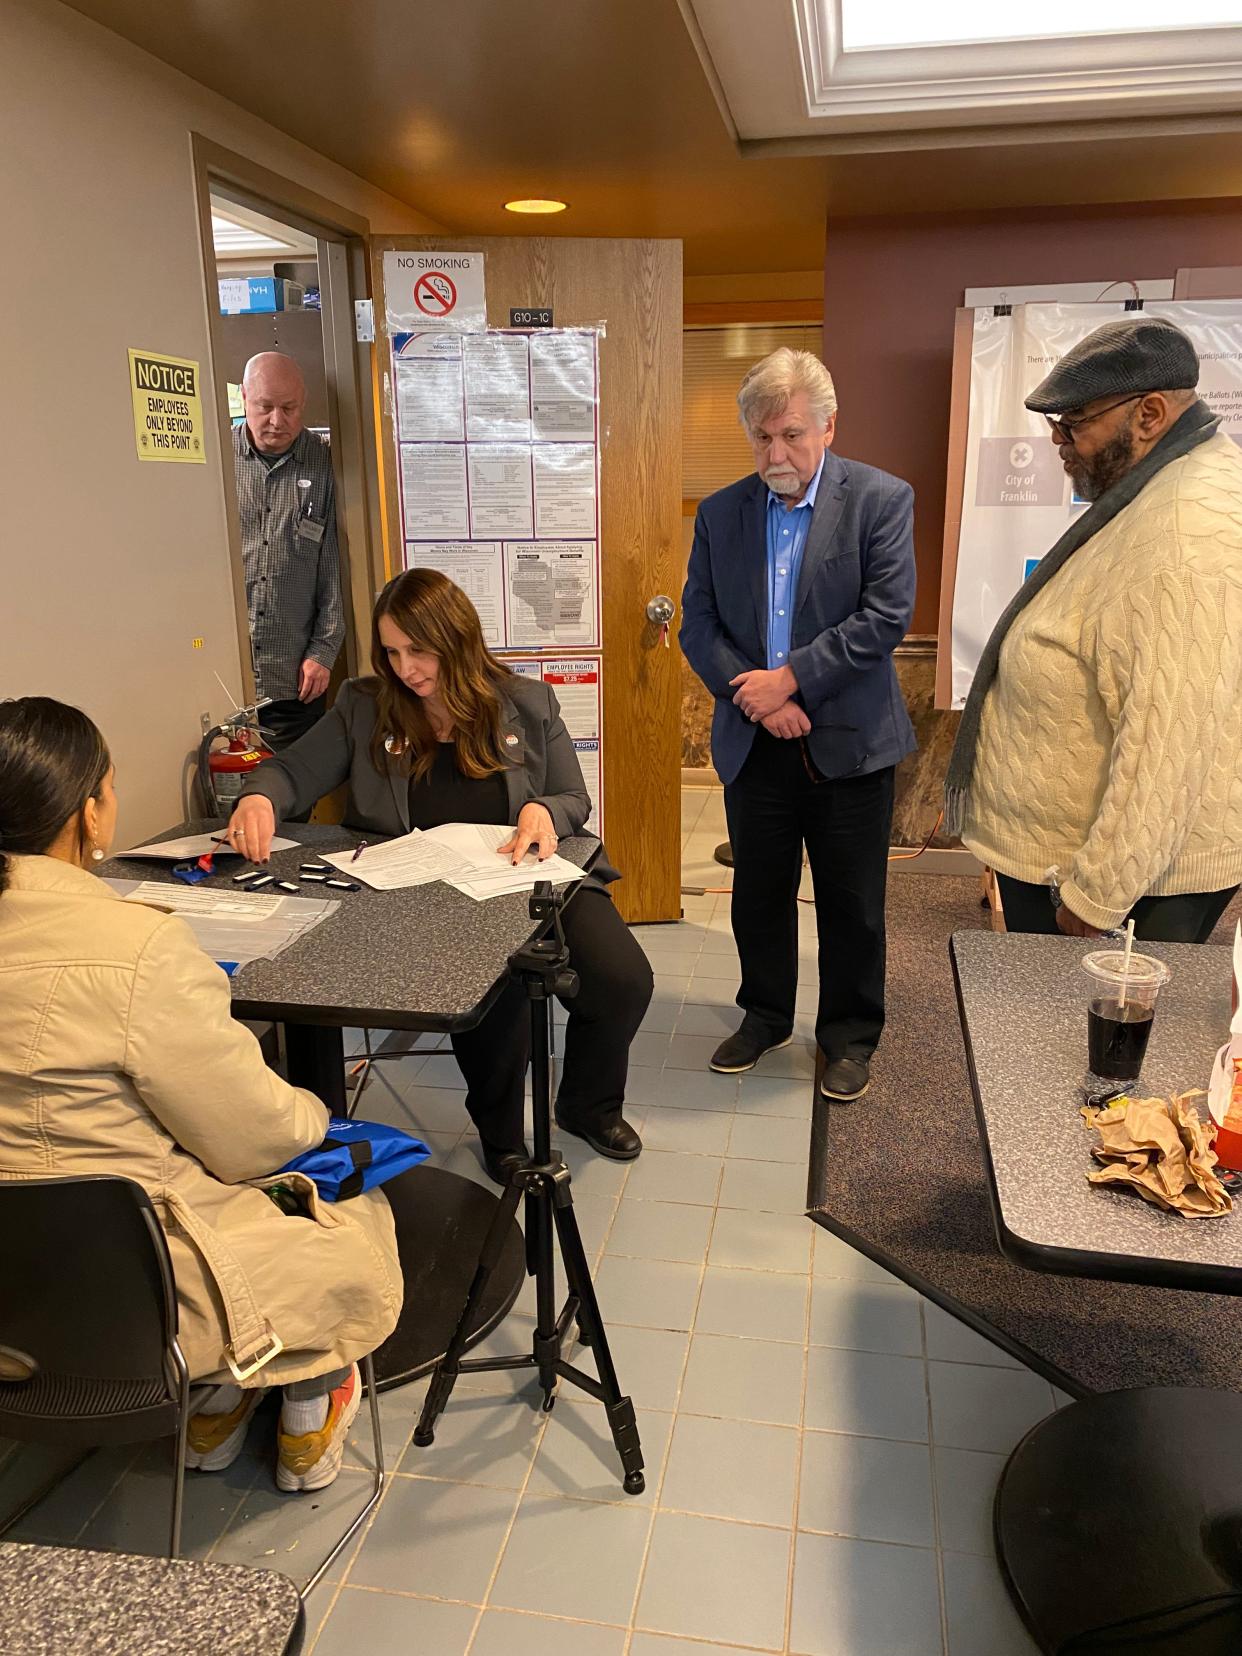 Milwaukee Election Commission personnel delivered thumb drives with absentee ballot results to the county election commission office shortly before 10 p.m. Tuesday.